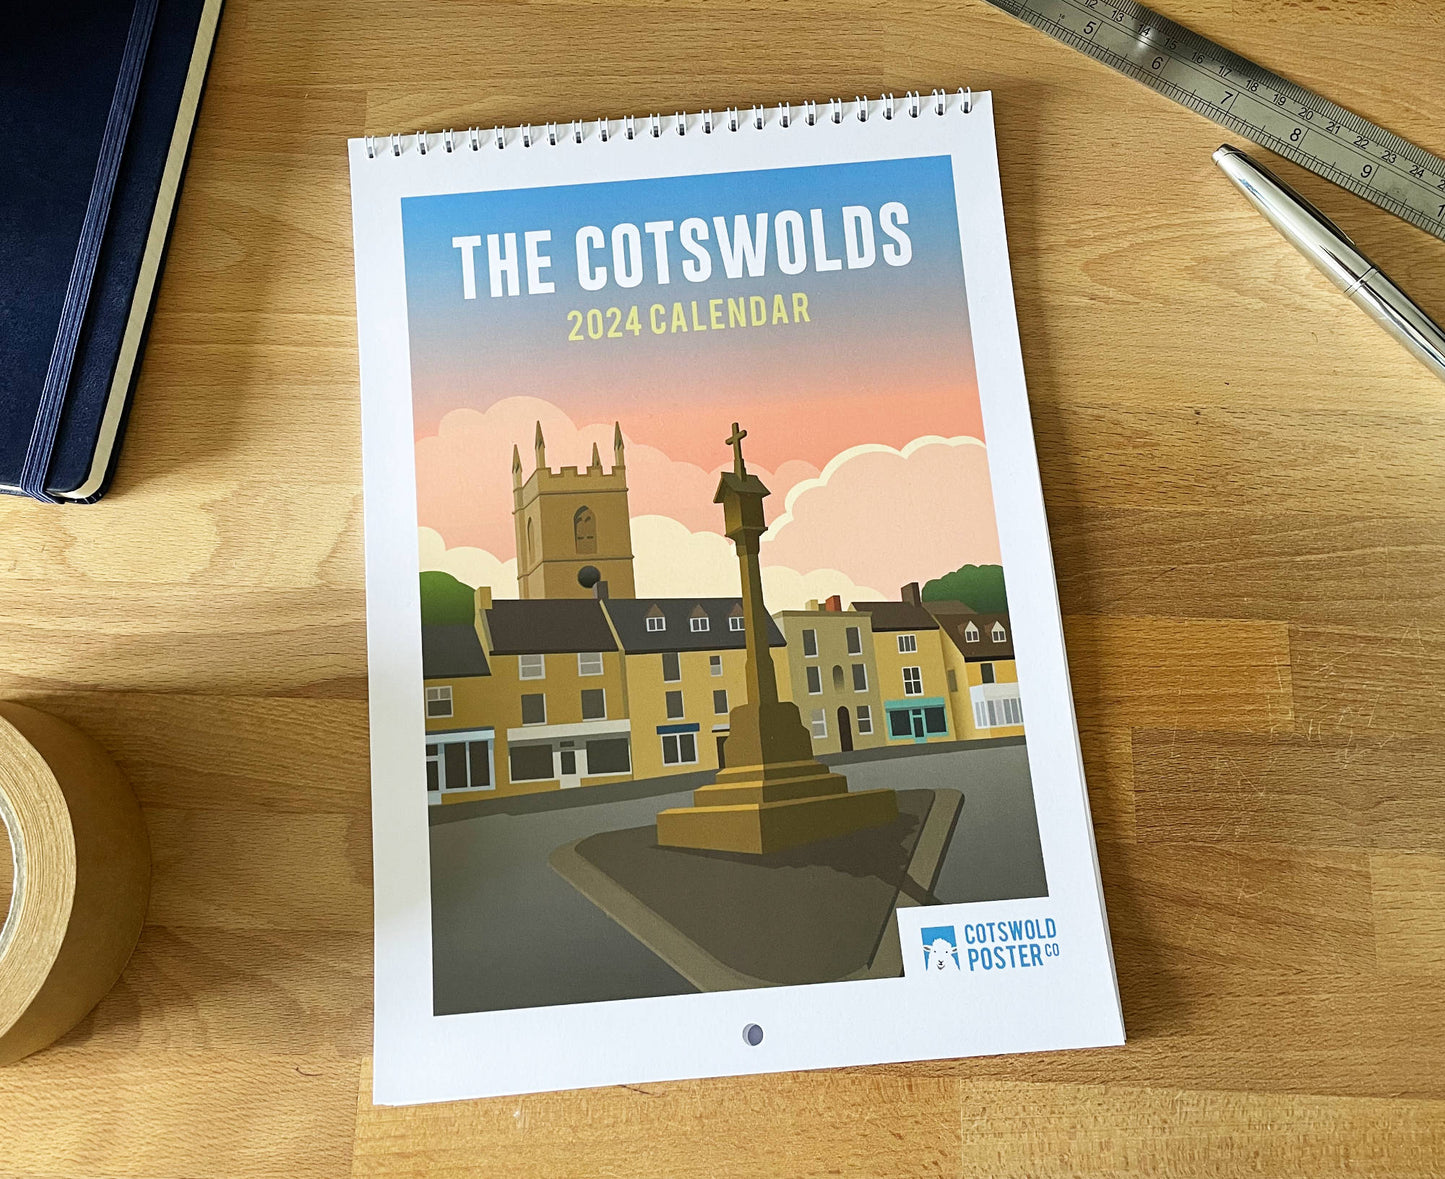 The Cotswolds 2024 Calendar front cover